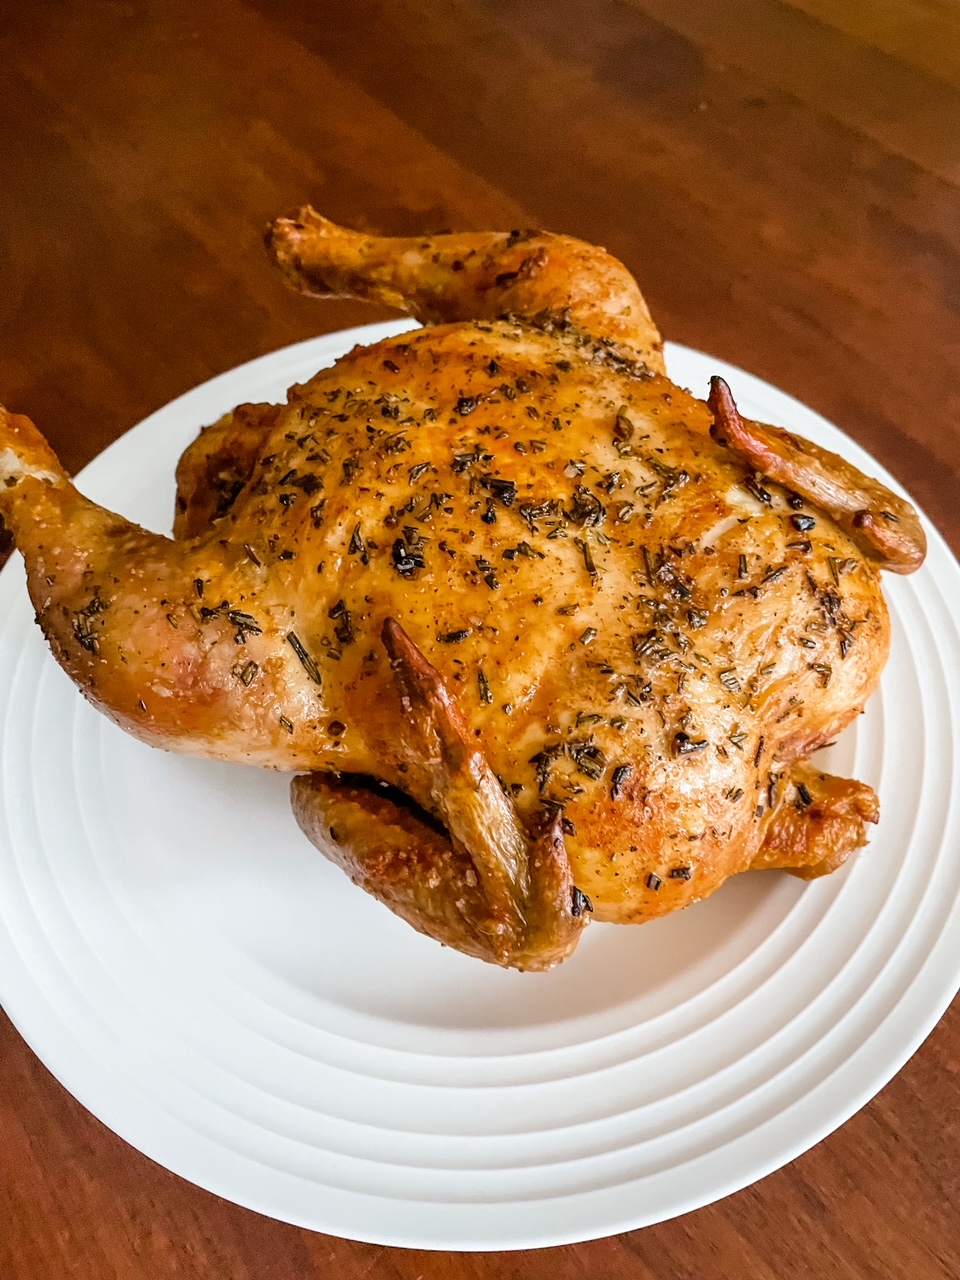 The finished Basic Herb-Roasted Chicken resting on a white plate